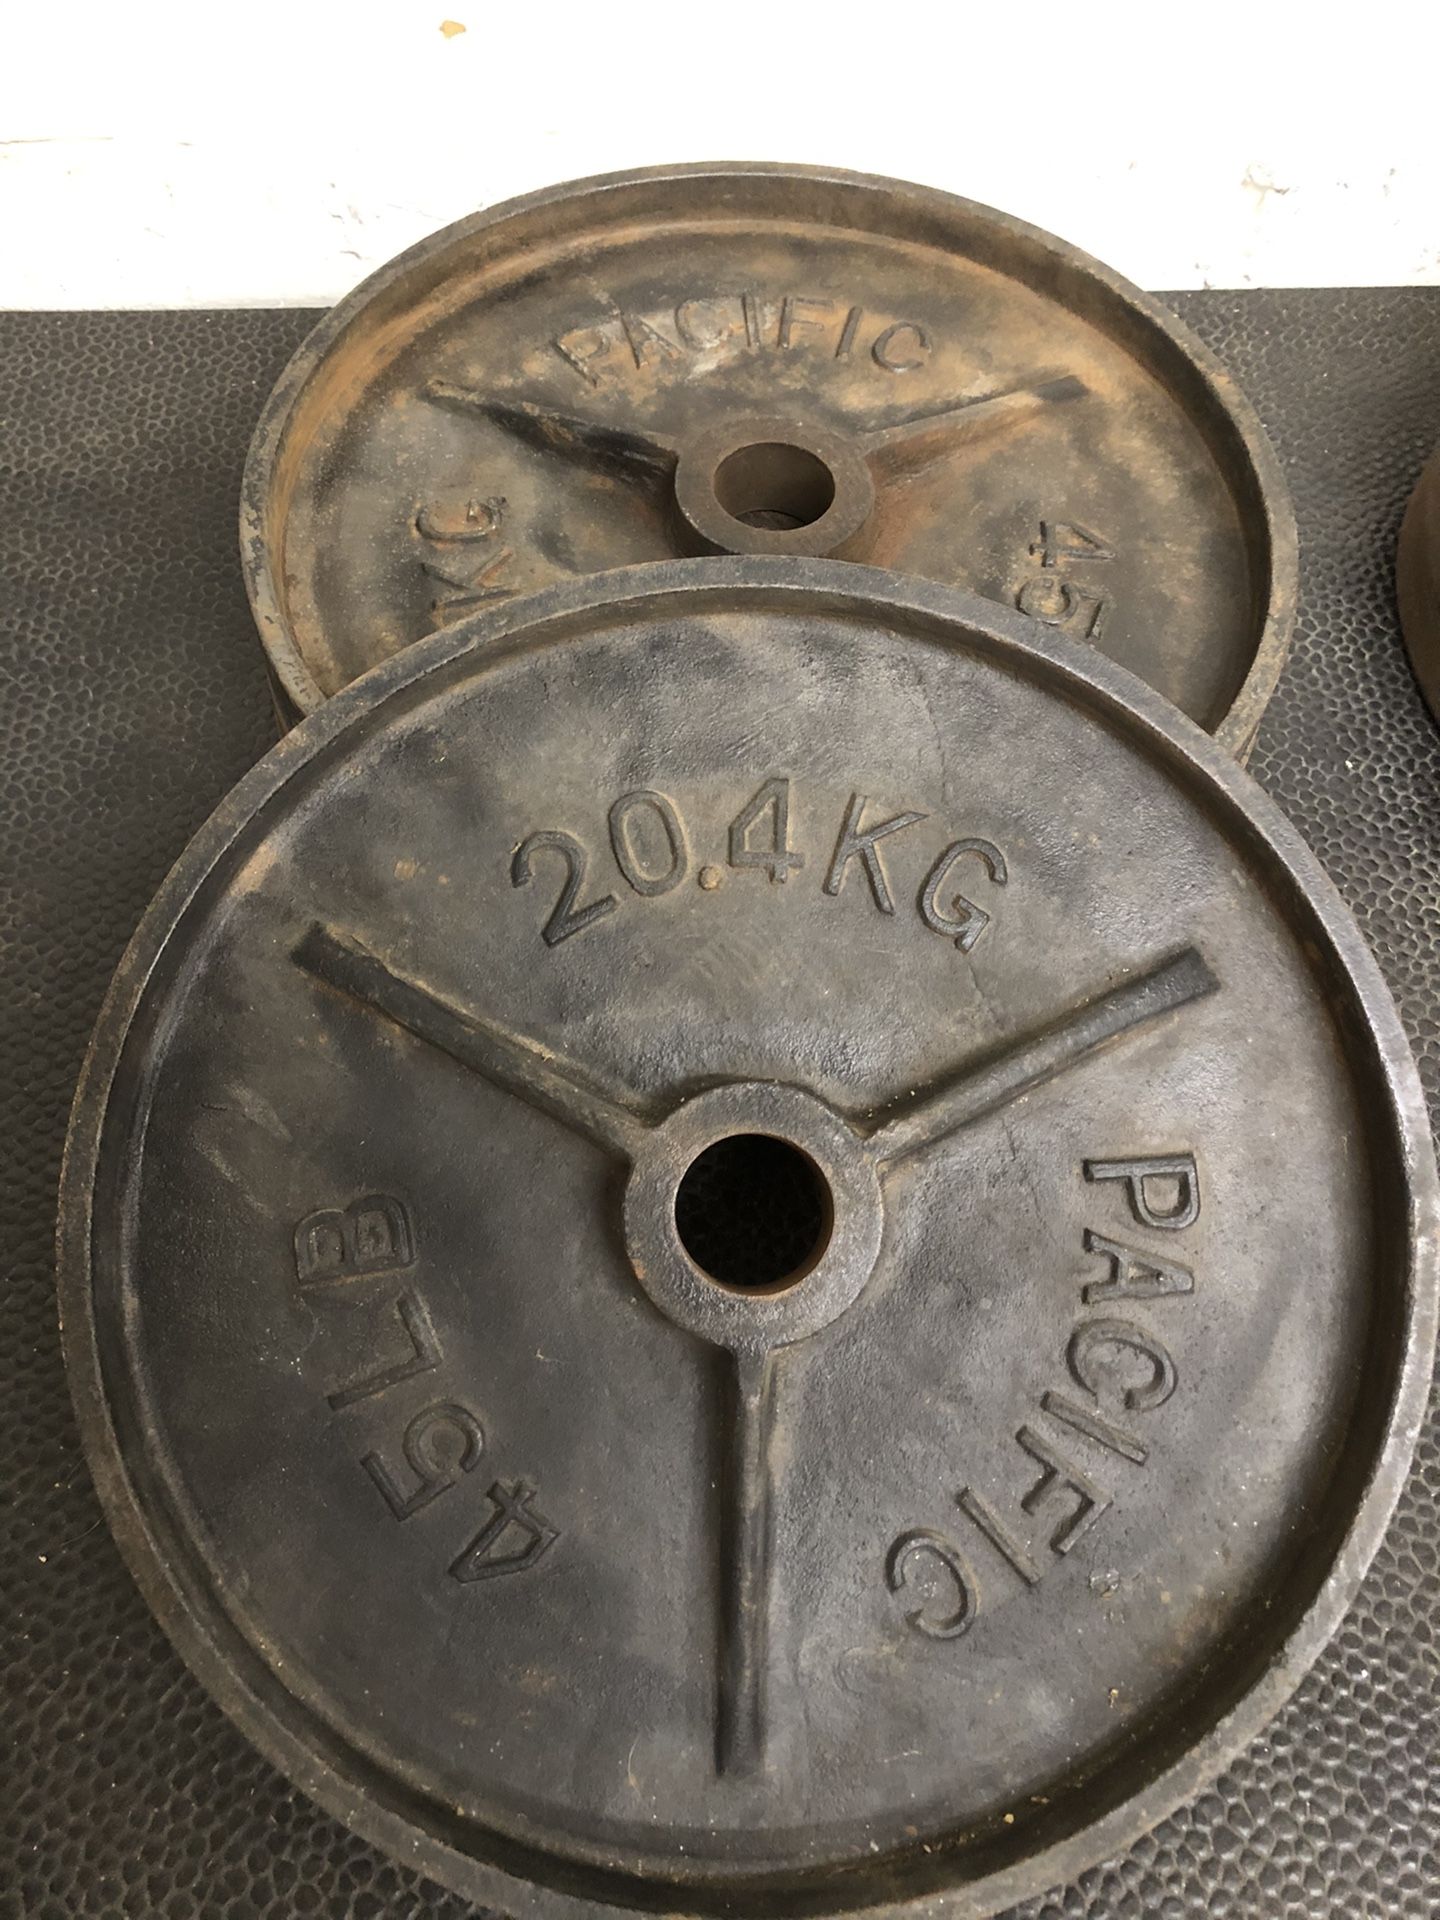 Pacific vintage deep dish olympic weight plates - 180 lbs